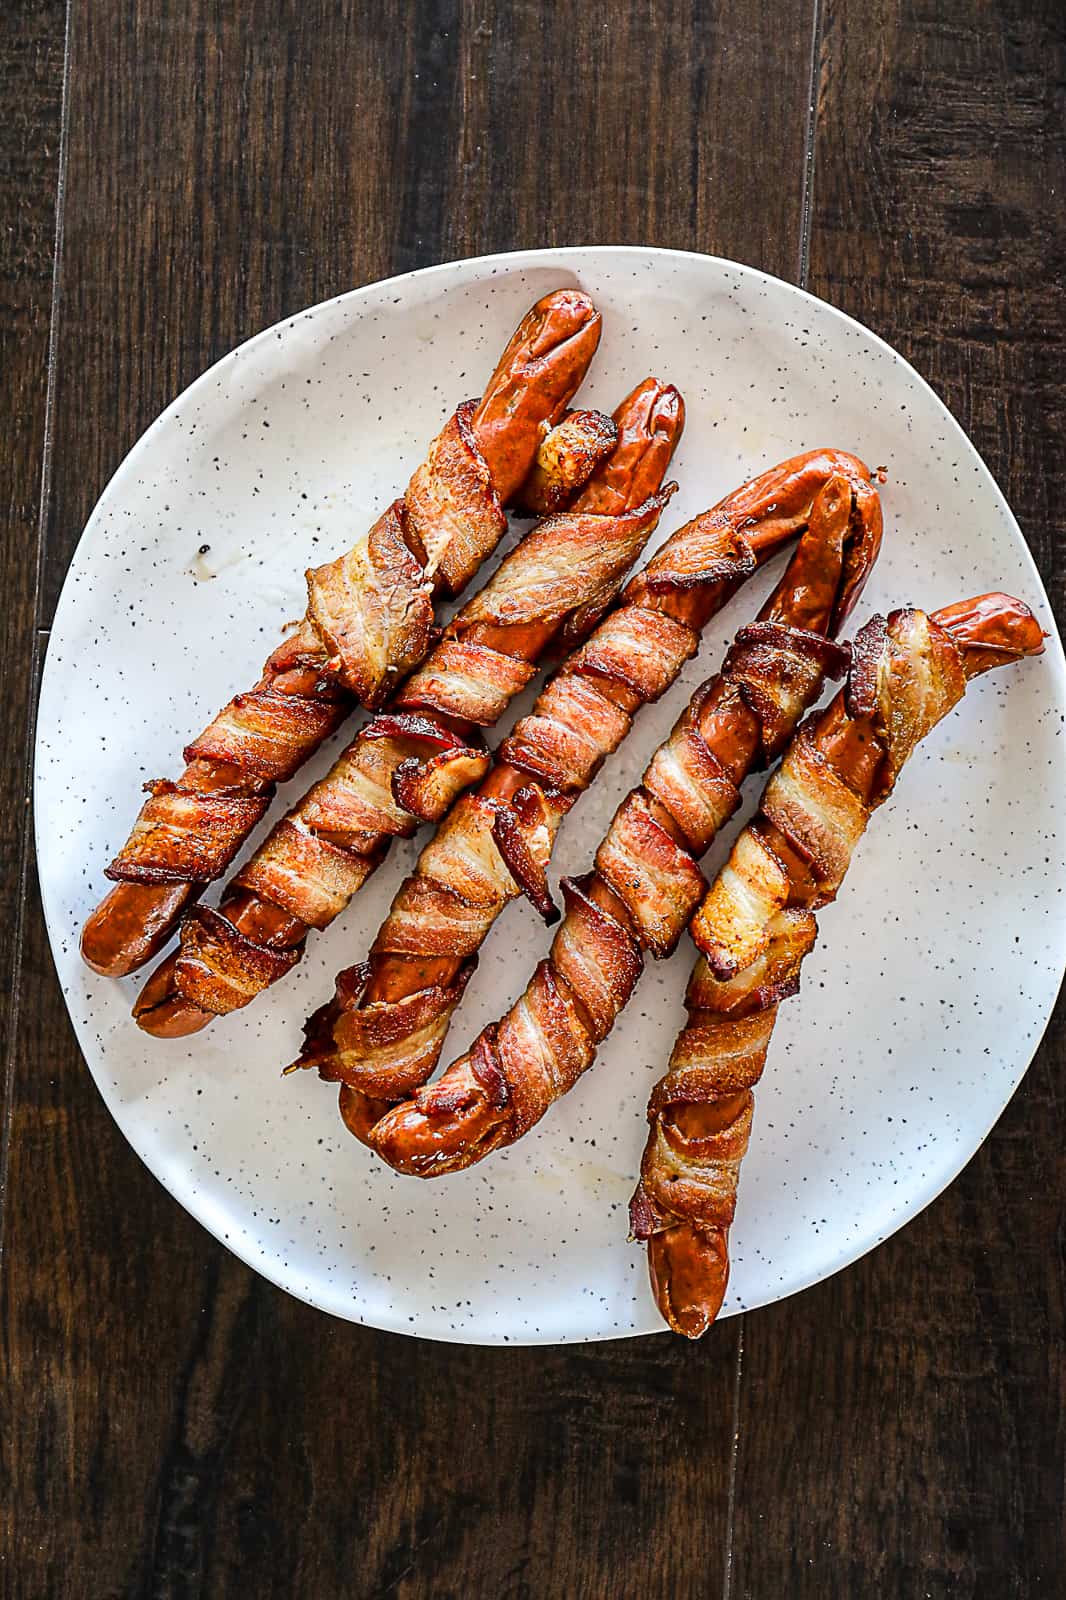 Hotdogs wrapped in bacon grill recipe for BBQ party